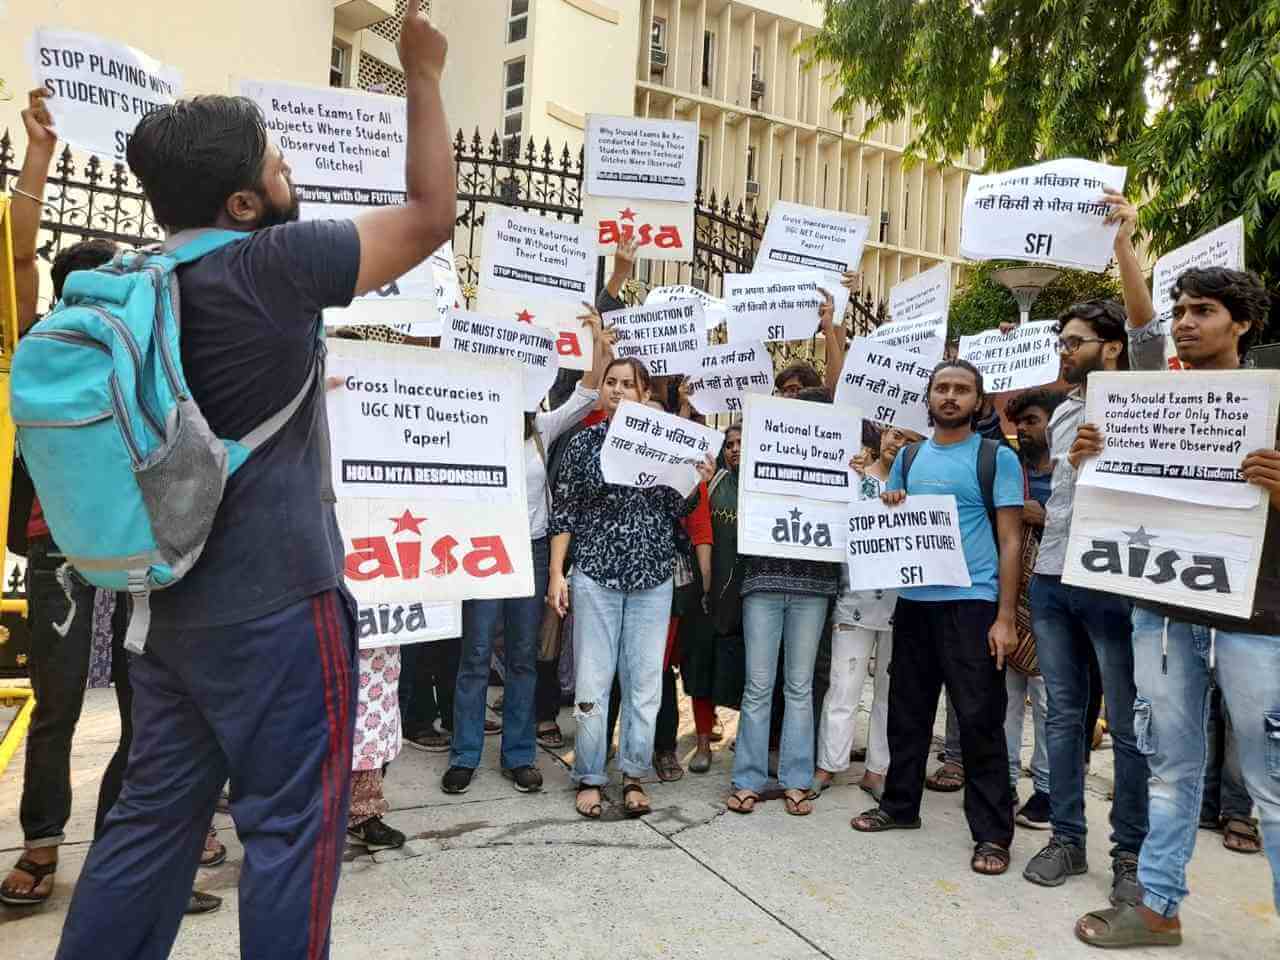 Protest at UGC